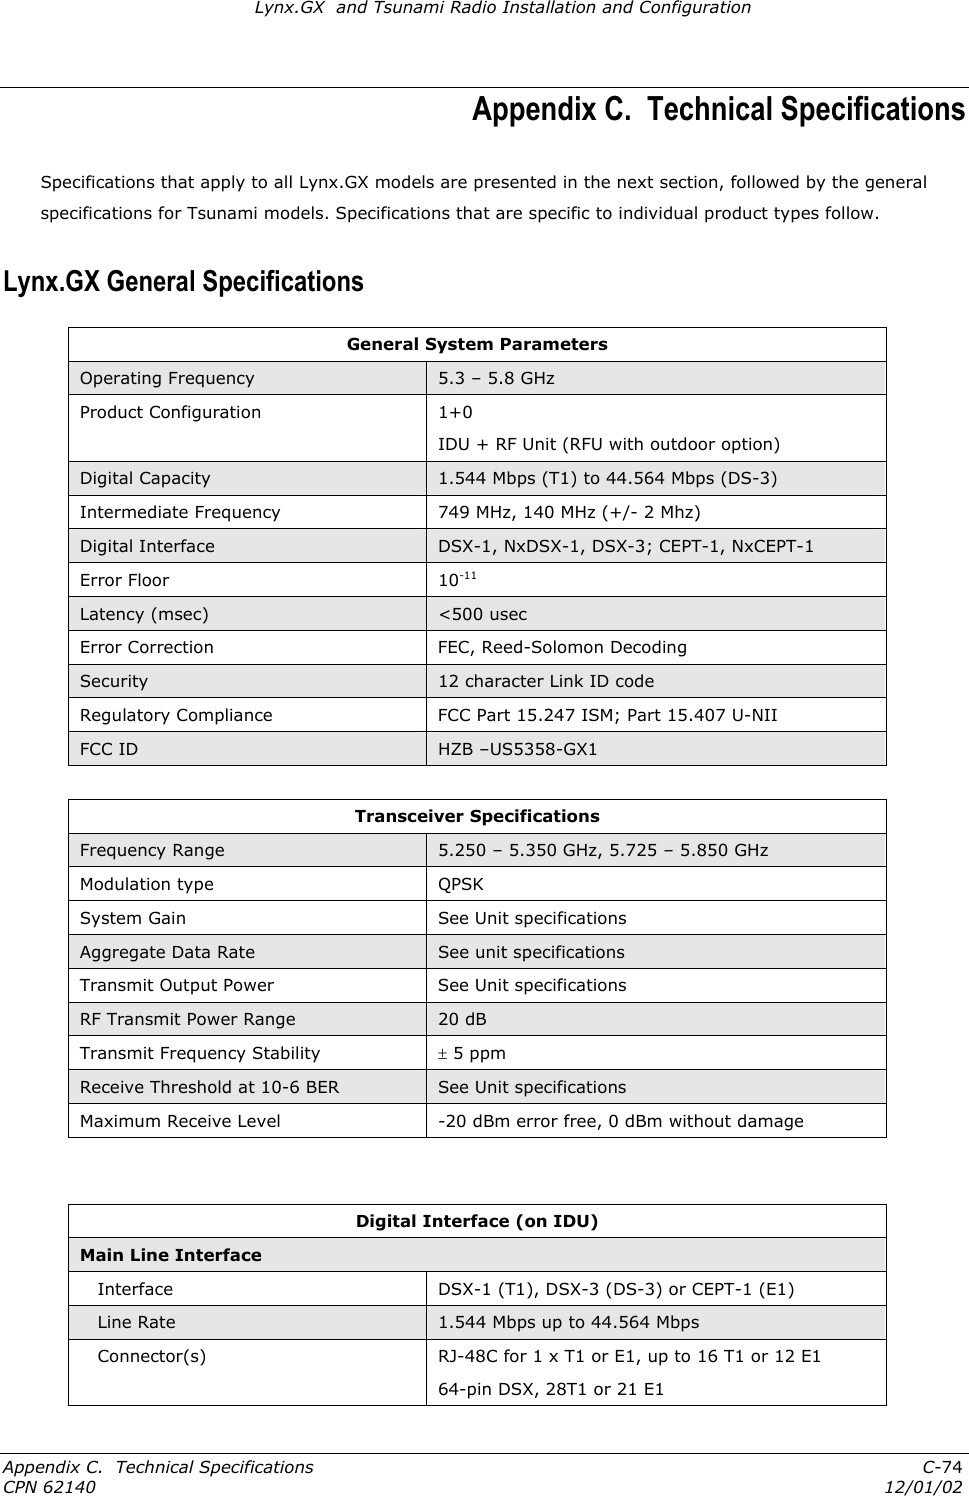 Lynx.GX  and Tsunami Radio Installation and Configuration Appendix C.  Technical Specifications Specifications that apply to all Lynx.GX models are presented in the next section, followed by the general specifications for Tsunami models. Specifications that are specific to individual product types follow. Lynx.GX General Specifications General System Parameters Operating Frequency  5.3 – 5.8 GHz Product Configuration   1+0 IDU + RF Unit (RFU with outdoor option) Digital Capacity  1.544 Mbps (T1) to 44.564 Mbps (DS-3) Intermediate Frequency  749 MHz, 140 MHz (+/- 2 Mhz) Digital Interface  DSX-1, NxDSX-1, DSX-3; CEPT-1, NxCEPT-1 Error Floor  10-11 Latency (msec)  &lt;500 usec Error Correction  FEC, Reed-Solomon Decoding Security  12 character Link ID code Regulatory Compliance  FCC Part 15.247 ISM; Part 15.407 U-NII FCC ID  HZB –US5358-GX1  Transceiver Specifications Frequency Range  5.250 – 5.350 GHz, 5.725 – 5.850 GHz Modulation type  QPSK System Gain  See Unit specifications Aggregate Data Rate  See unit specifications Transmit Output Power  See Unit specifications RF Transmit Power Range  20 dB Transmit Frequency Stability  ± 5 ppm  Receive Threshold at 10-6 BER  See Unit specifications Maximum Receive Level  -20 dBm error free, 0 dBm without damage   Digital Interface (on IDU) Main Line Interface    Interface  DSX-1 (T1), DSX-3 (DS-3) or CEPT-1 (E1)    Line Rate  1.544 Mbps up to 44.564 Mbps    Connector(s)  RJ-48C for 1 x T1 or E1, up to 16 T1 or 12 E1  64-pin DSX, 28T1 or 21 E1 Appendix C.  Technical Specifications  C-74 CPN 62140  12/01/02 